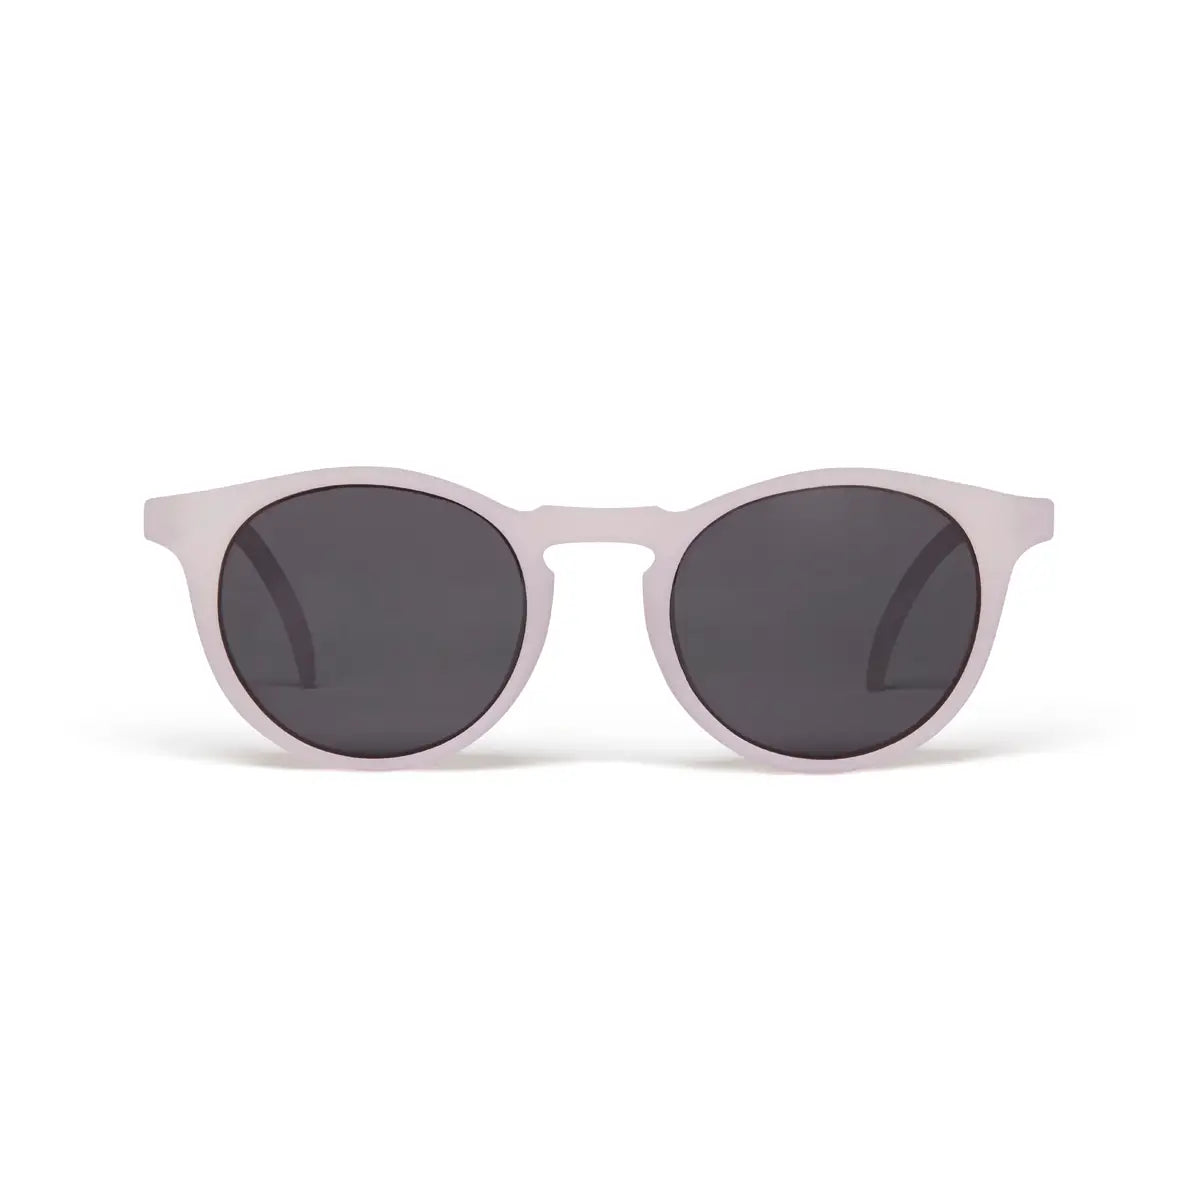 Baby Polarized Sunglasses in Lilac